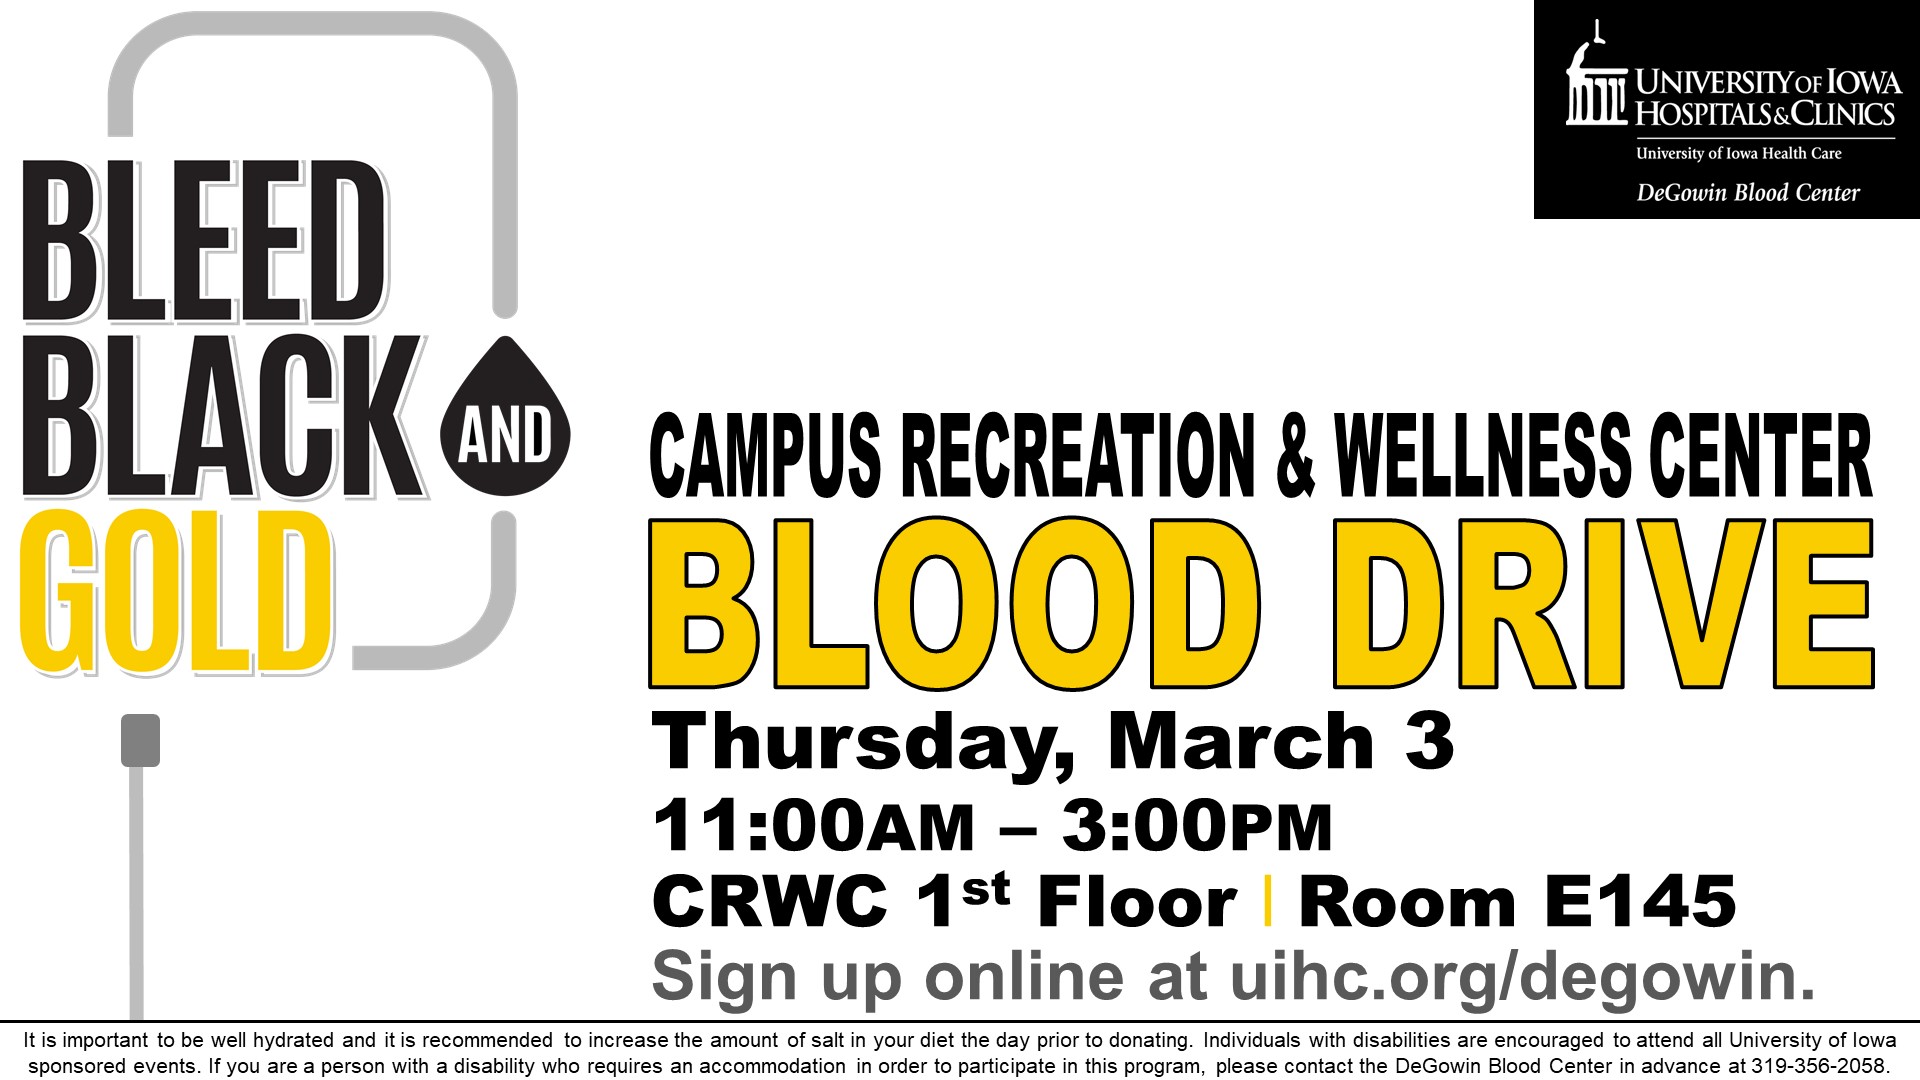 Bleed Black and Golf. Campus Recreation and Wellness Center Blood Drive. Thursday, March 3. 11 am - 3 pm. CRWC 1st floor | Room E145 Sign up online at uihc.org/degowin